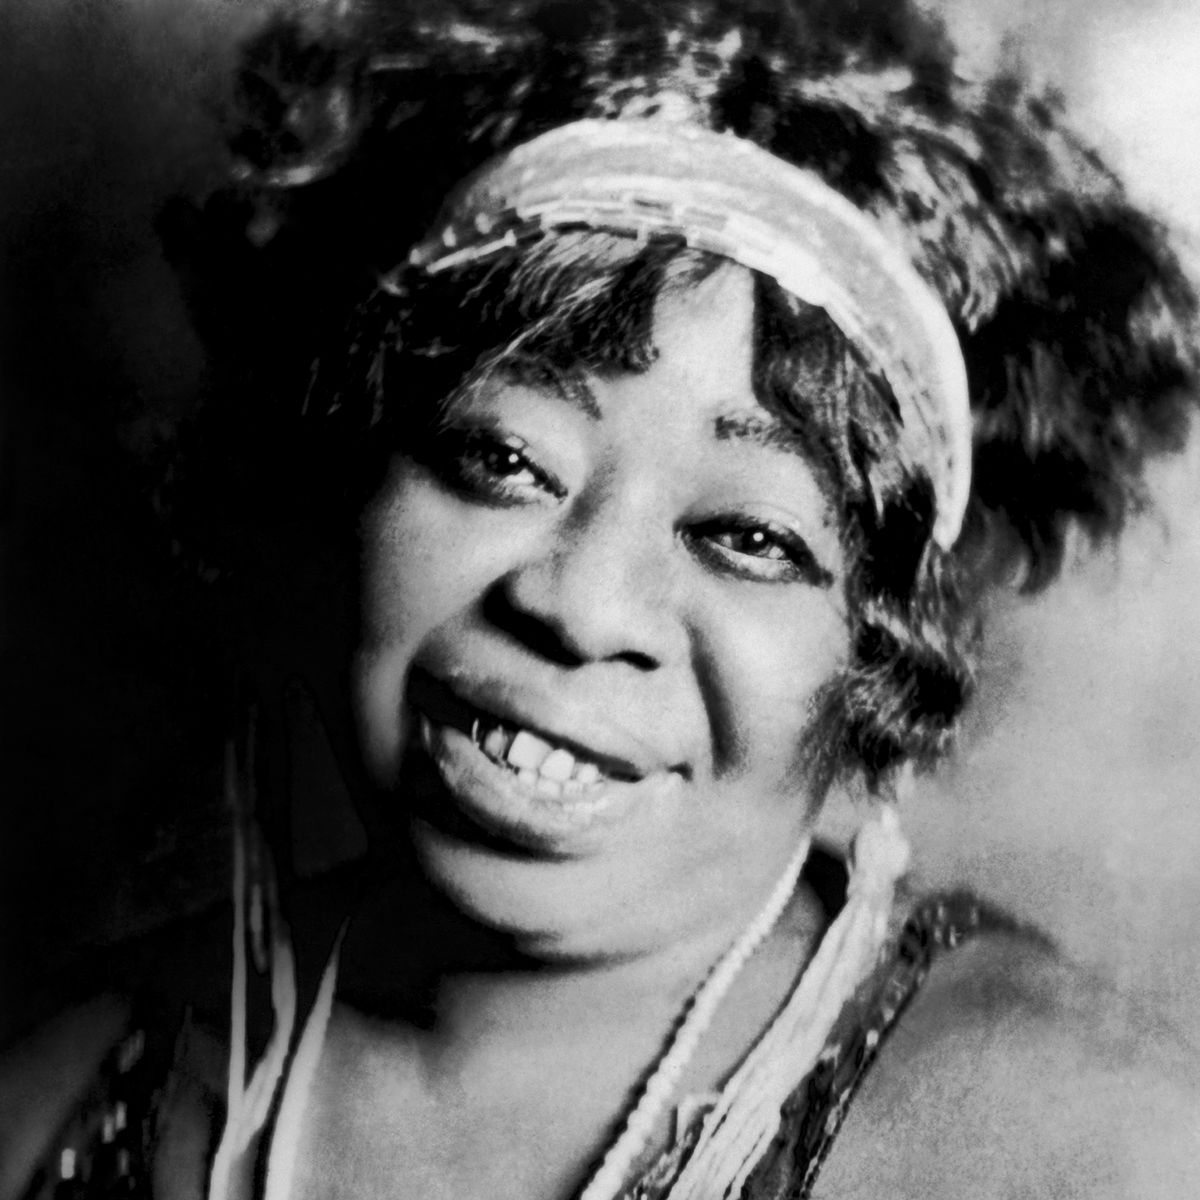 Ma Rainey African-American professional blues singers Ma Rainey poses for a portrait, circa 1923. (Photo by Donaldson Collection/Getty Images)